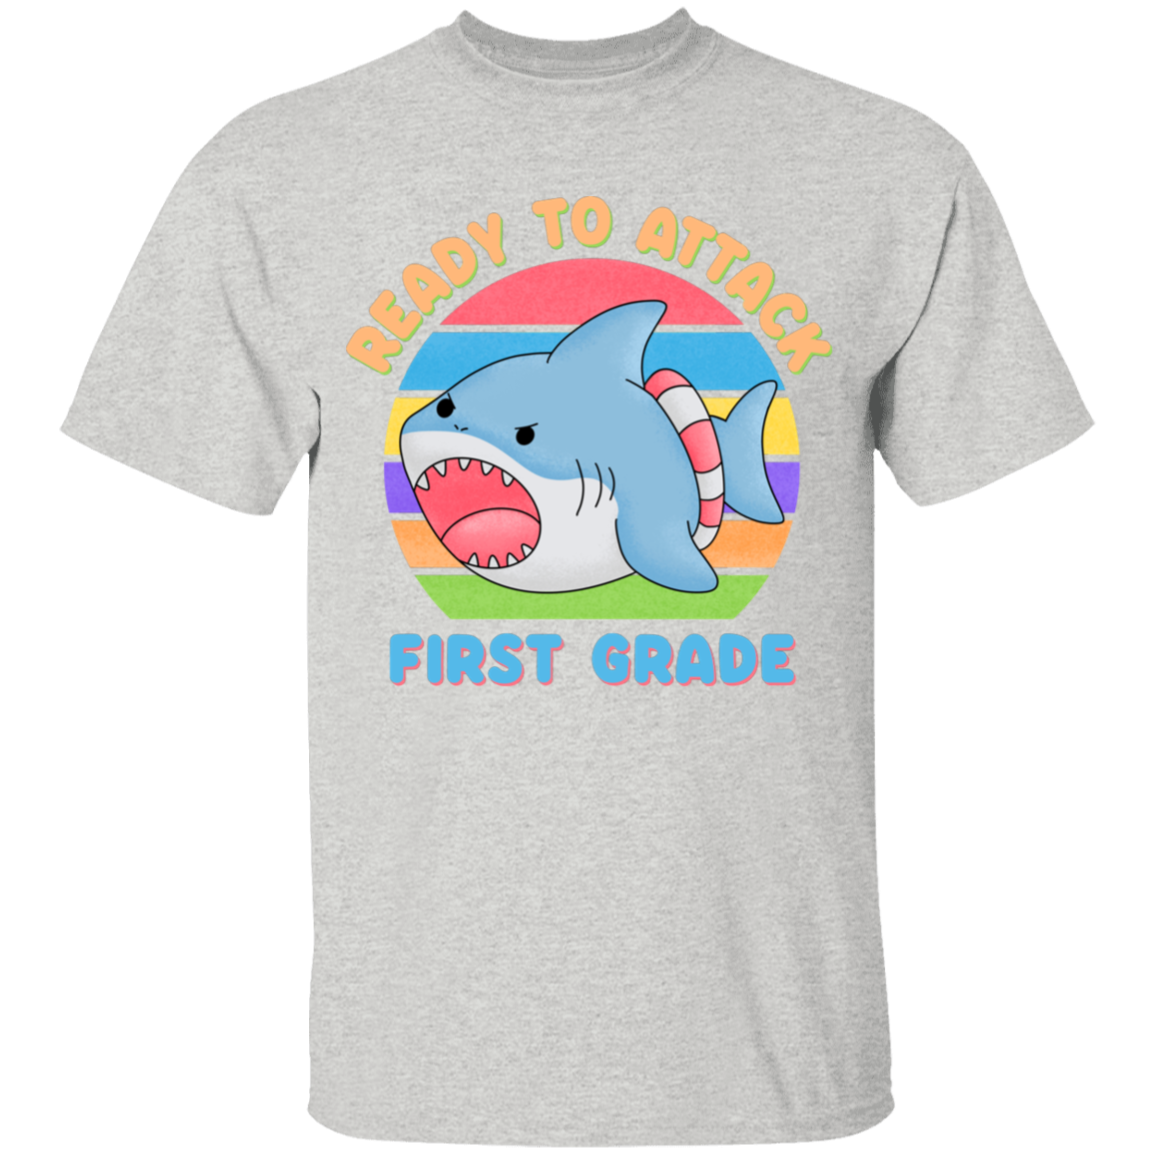 Ready to Attack Shark First Grade Youth Cotton T-Shirt